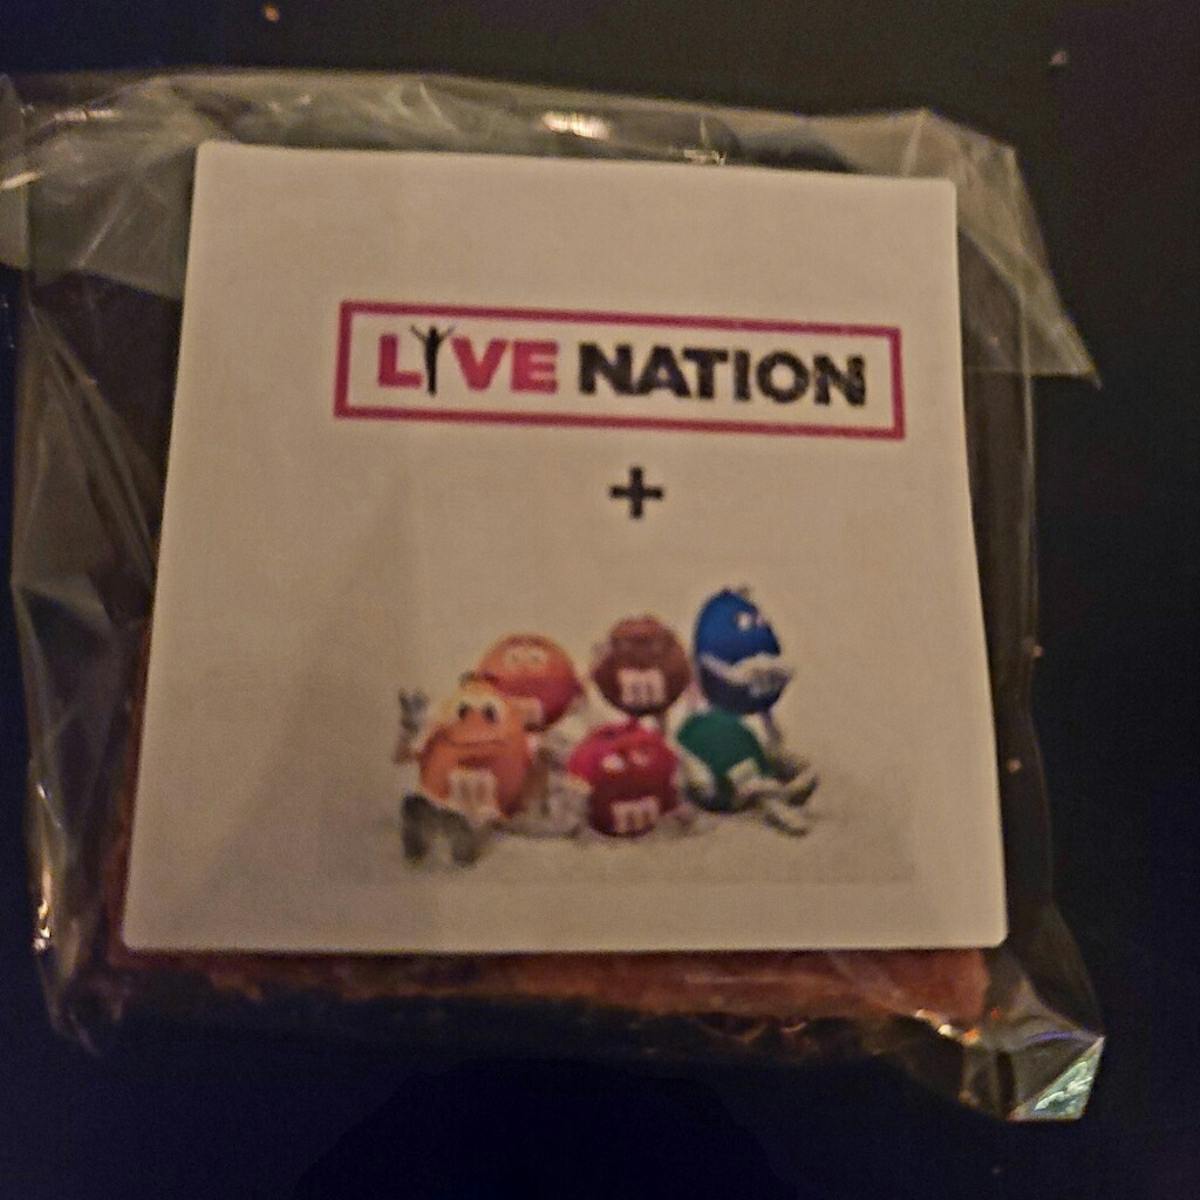 live nation and M&M collaboration blondie dessert for a private event